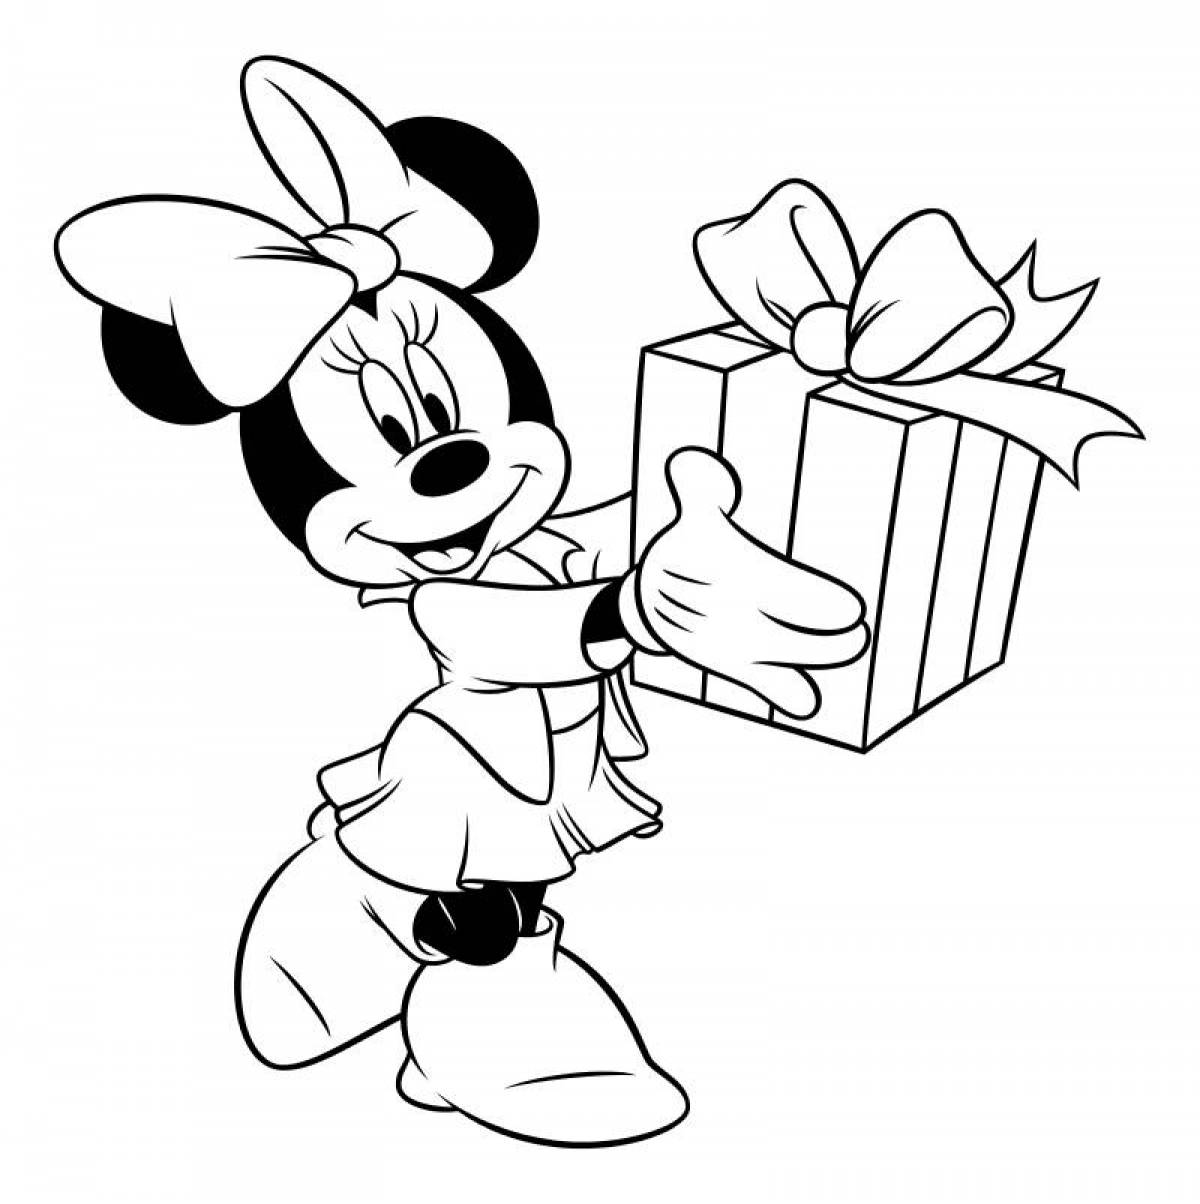 Mickey mouse sunny coloring for girls